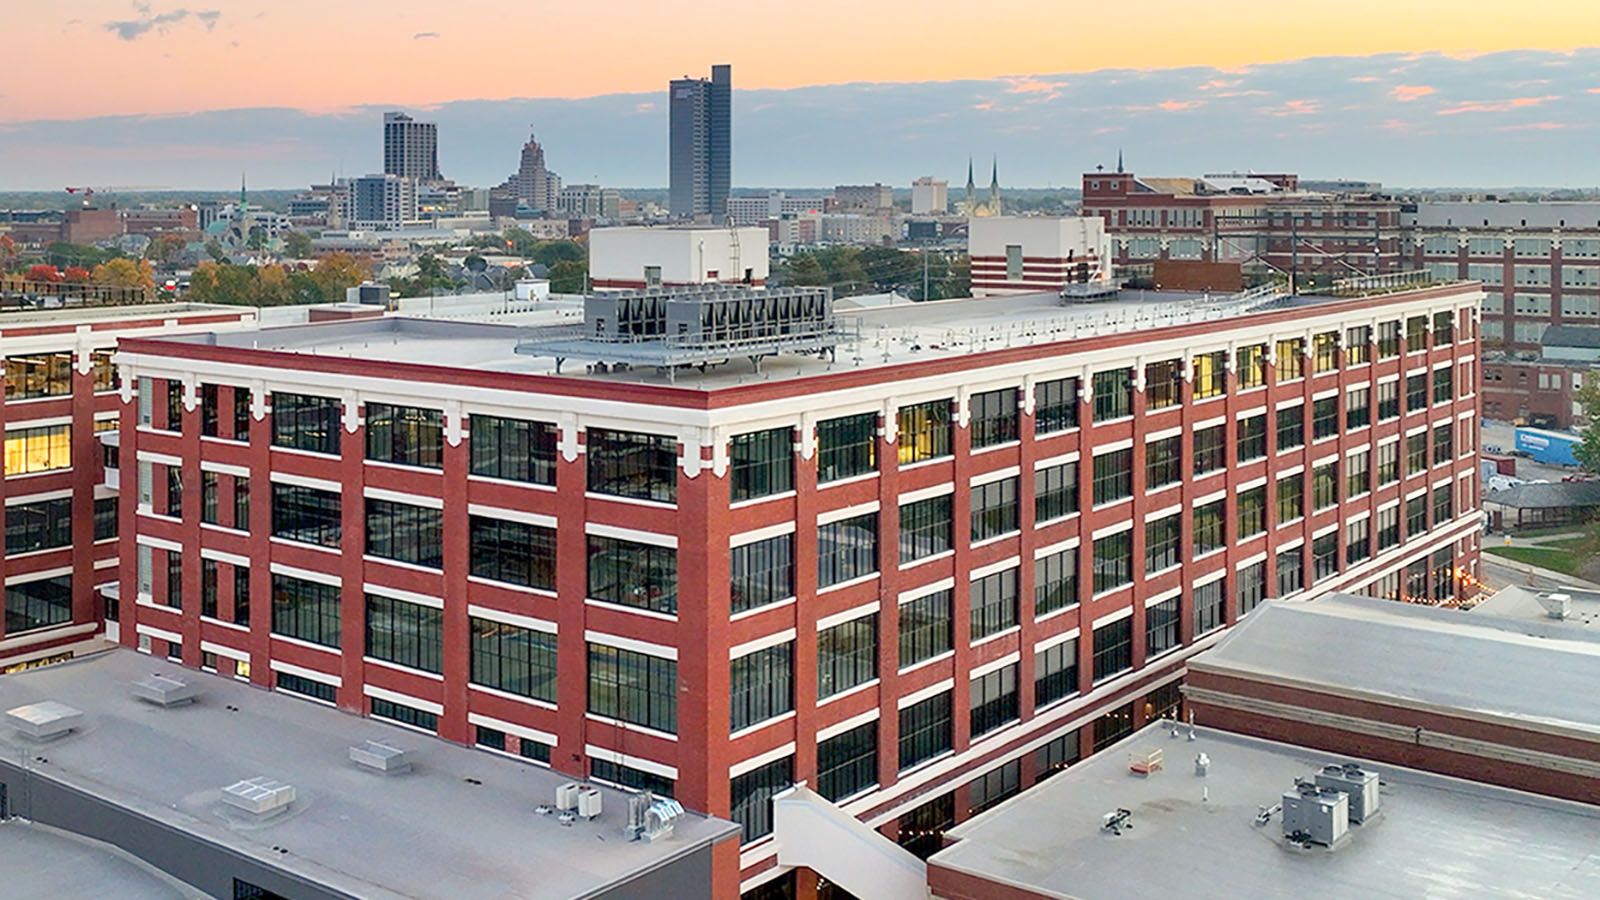 The Electric Works campus has been added to the National Register of Historic Places.